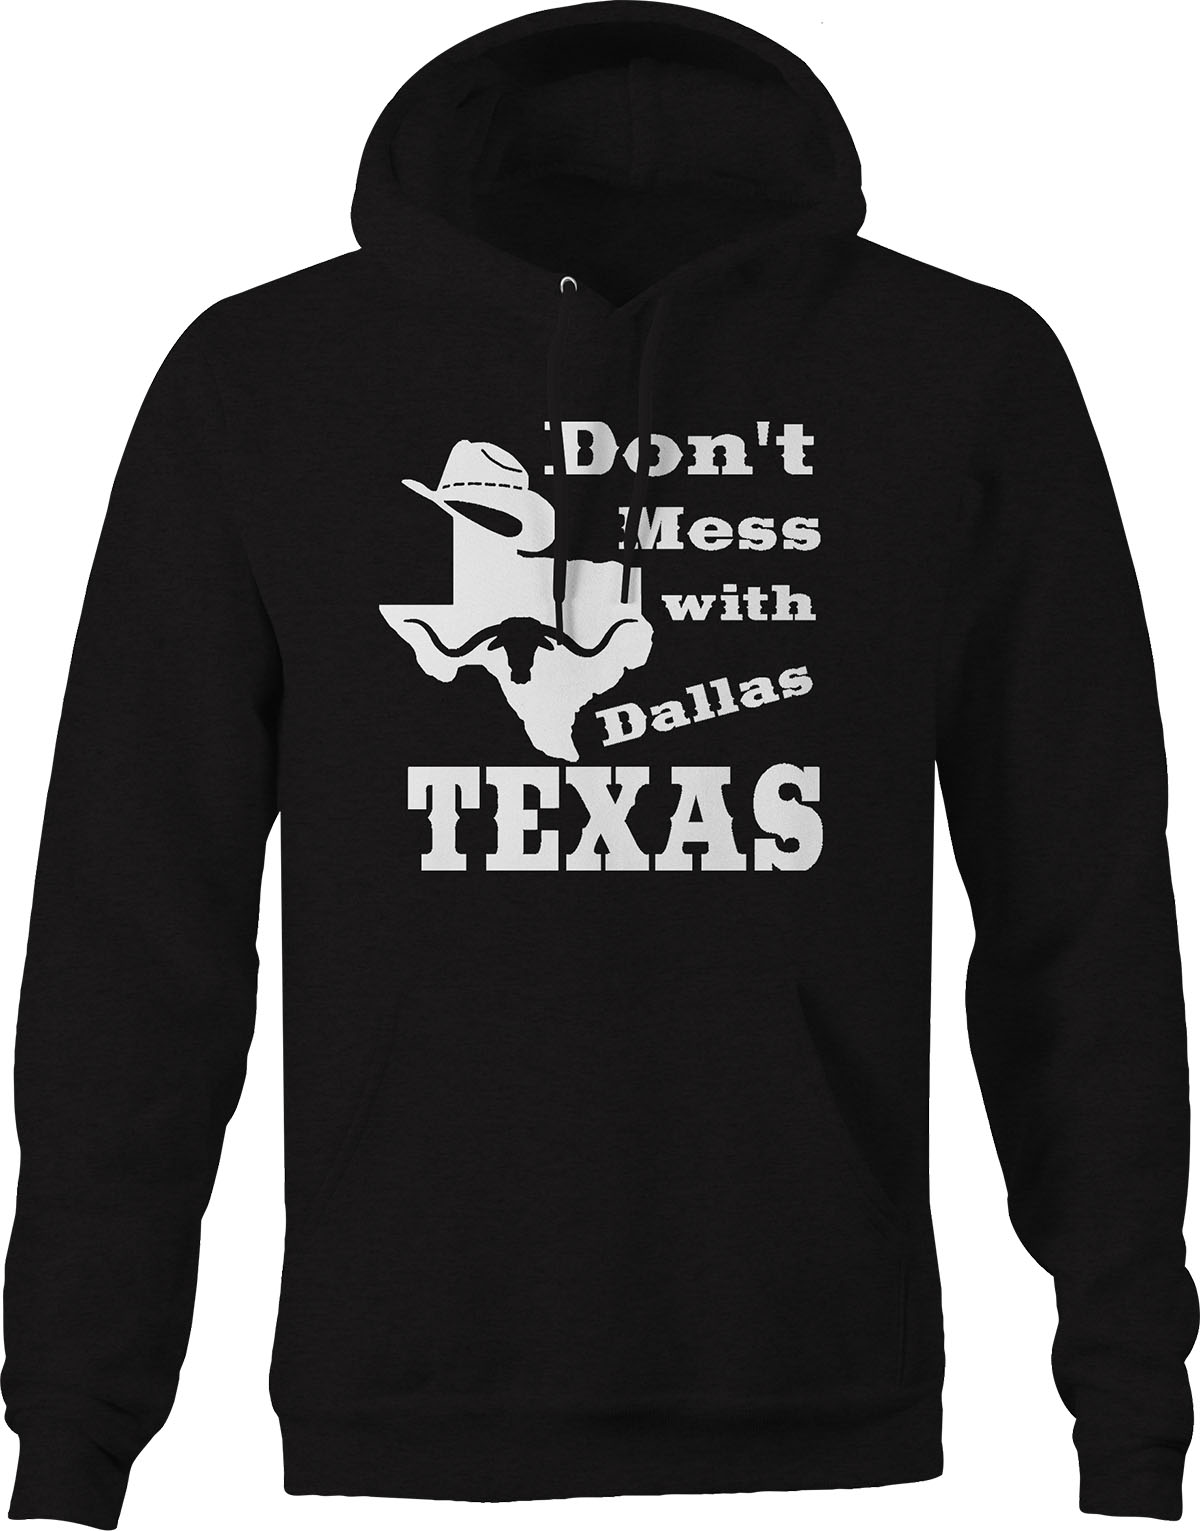 Don't Mess with Texas Cowboy Dallas Sweatshirt for Men Small Black - image 1 of 2